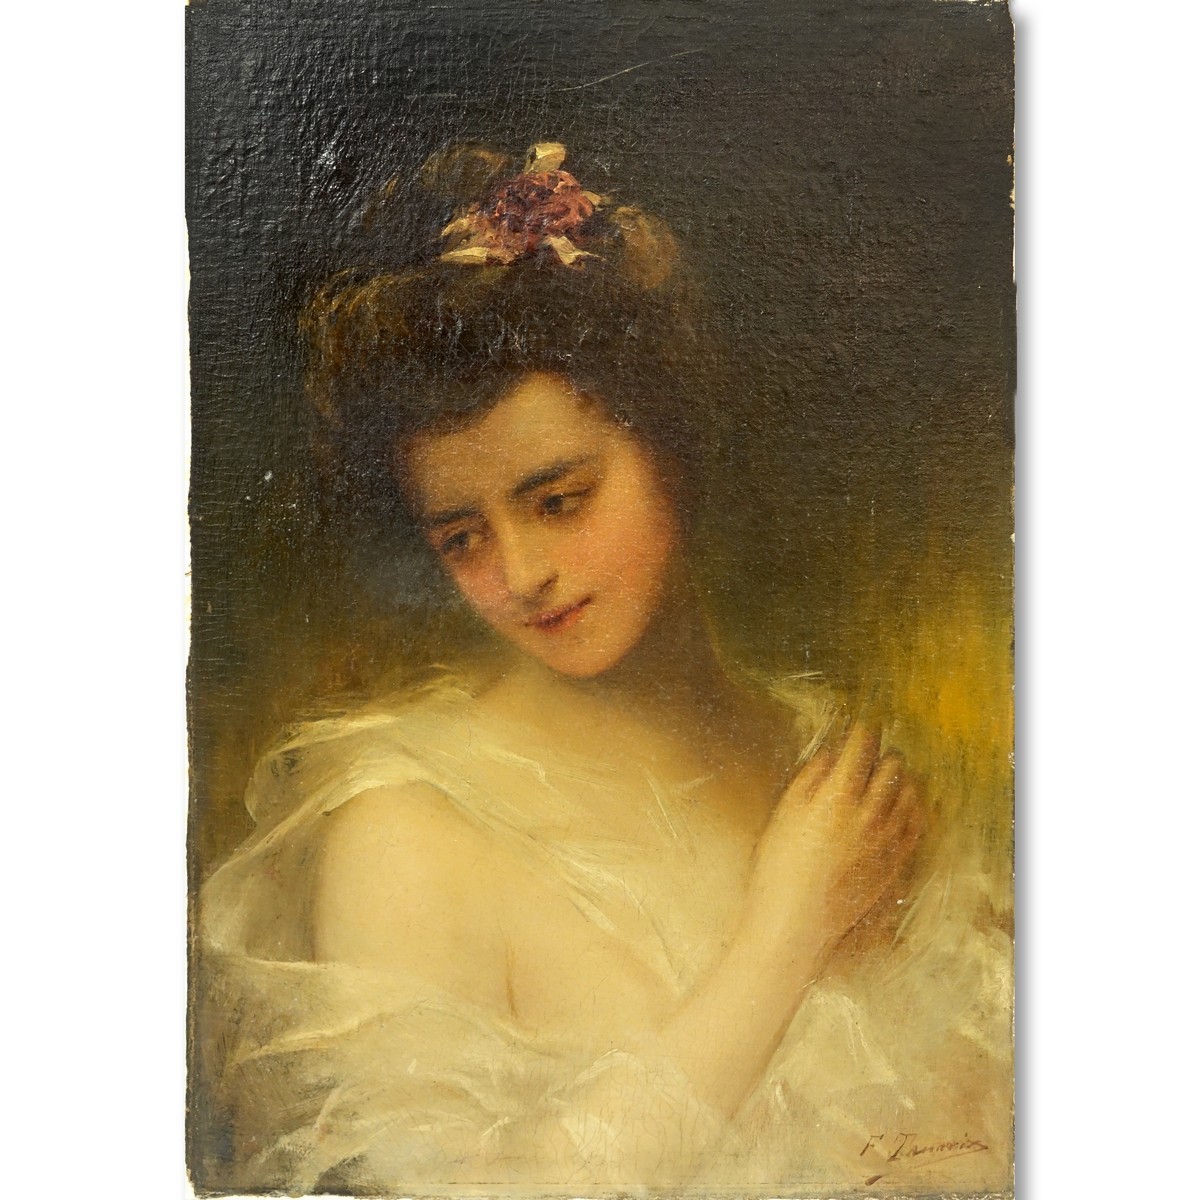 Antique Oil on Canvas Laid on Cardboard, Portrait of a Young Girl, Lower Right. Heavy craquelure to surface, yellowing to varnish.